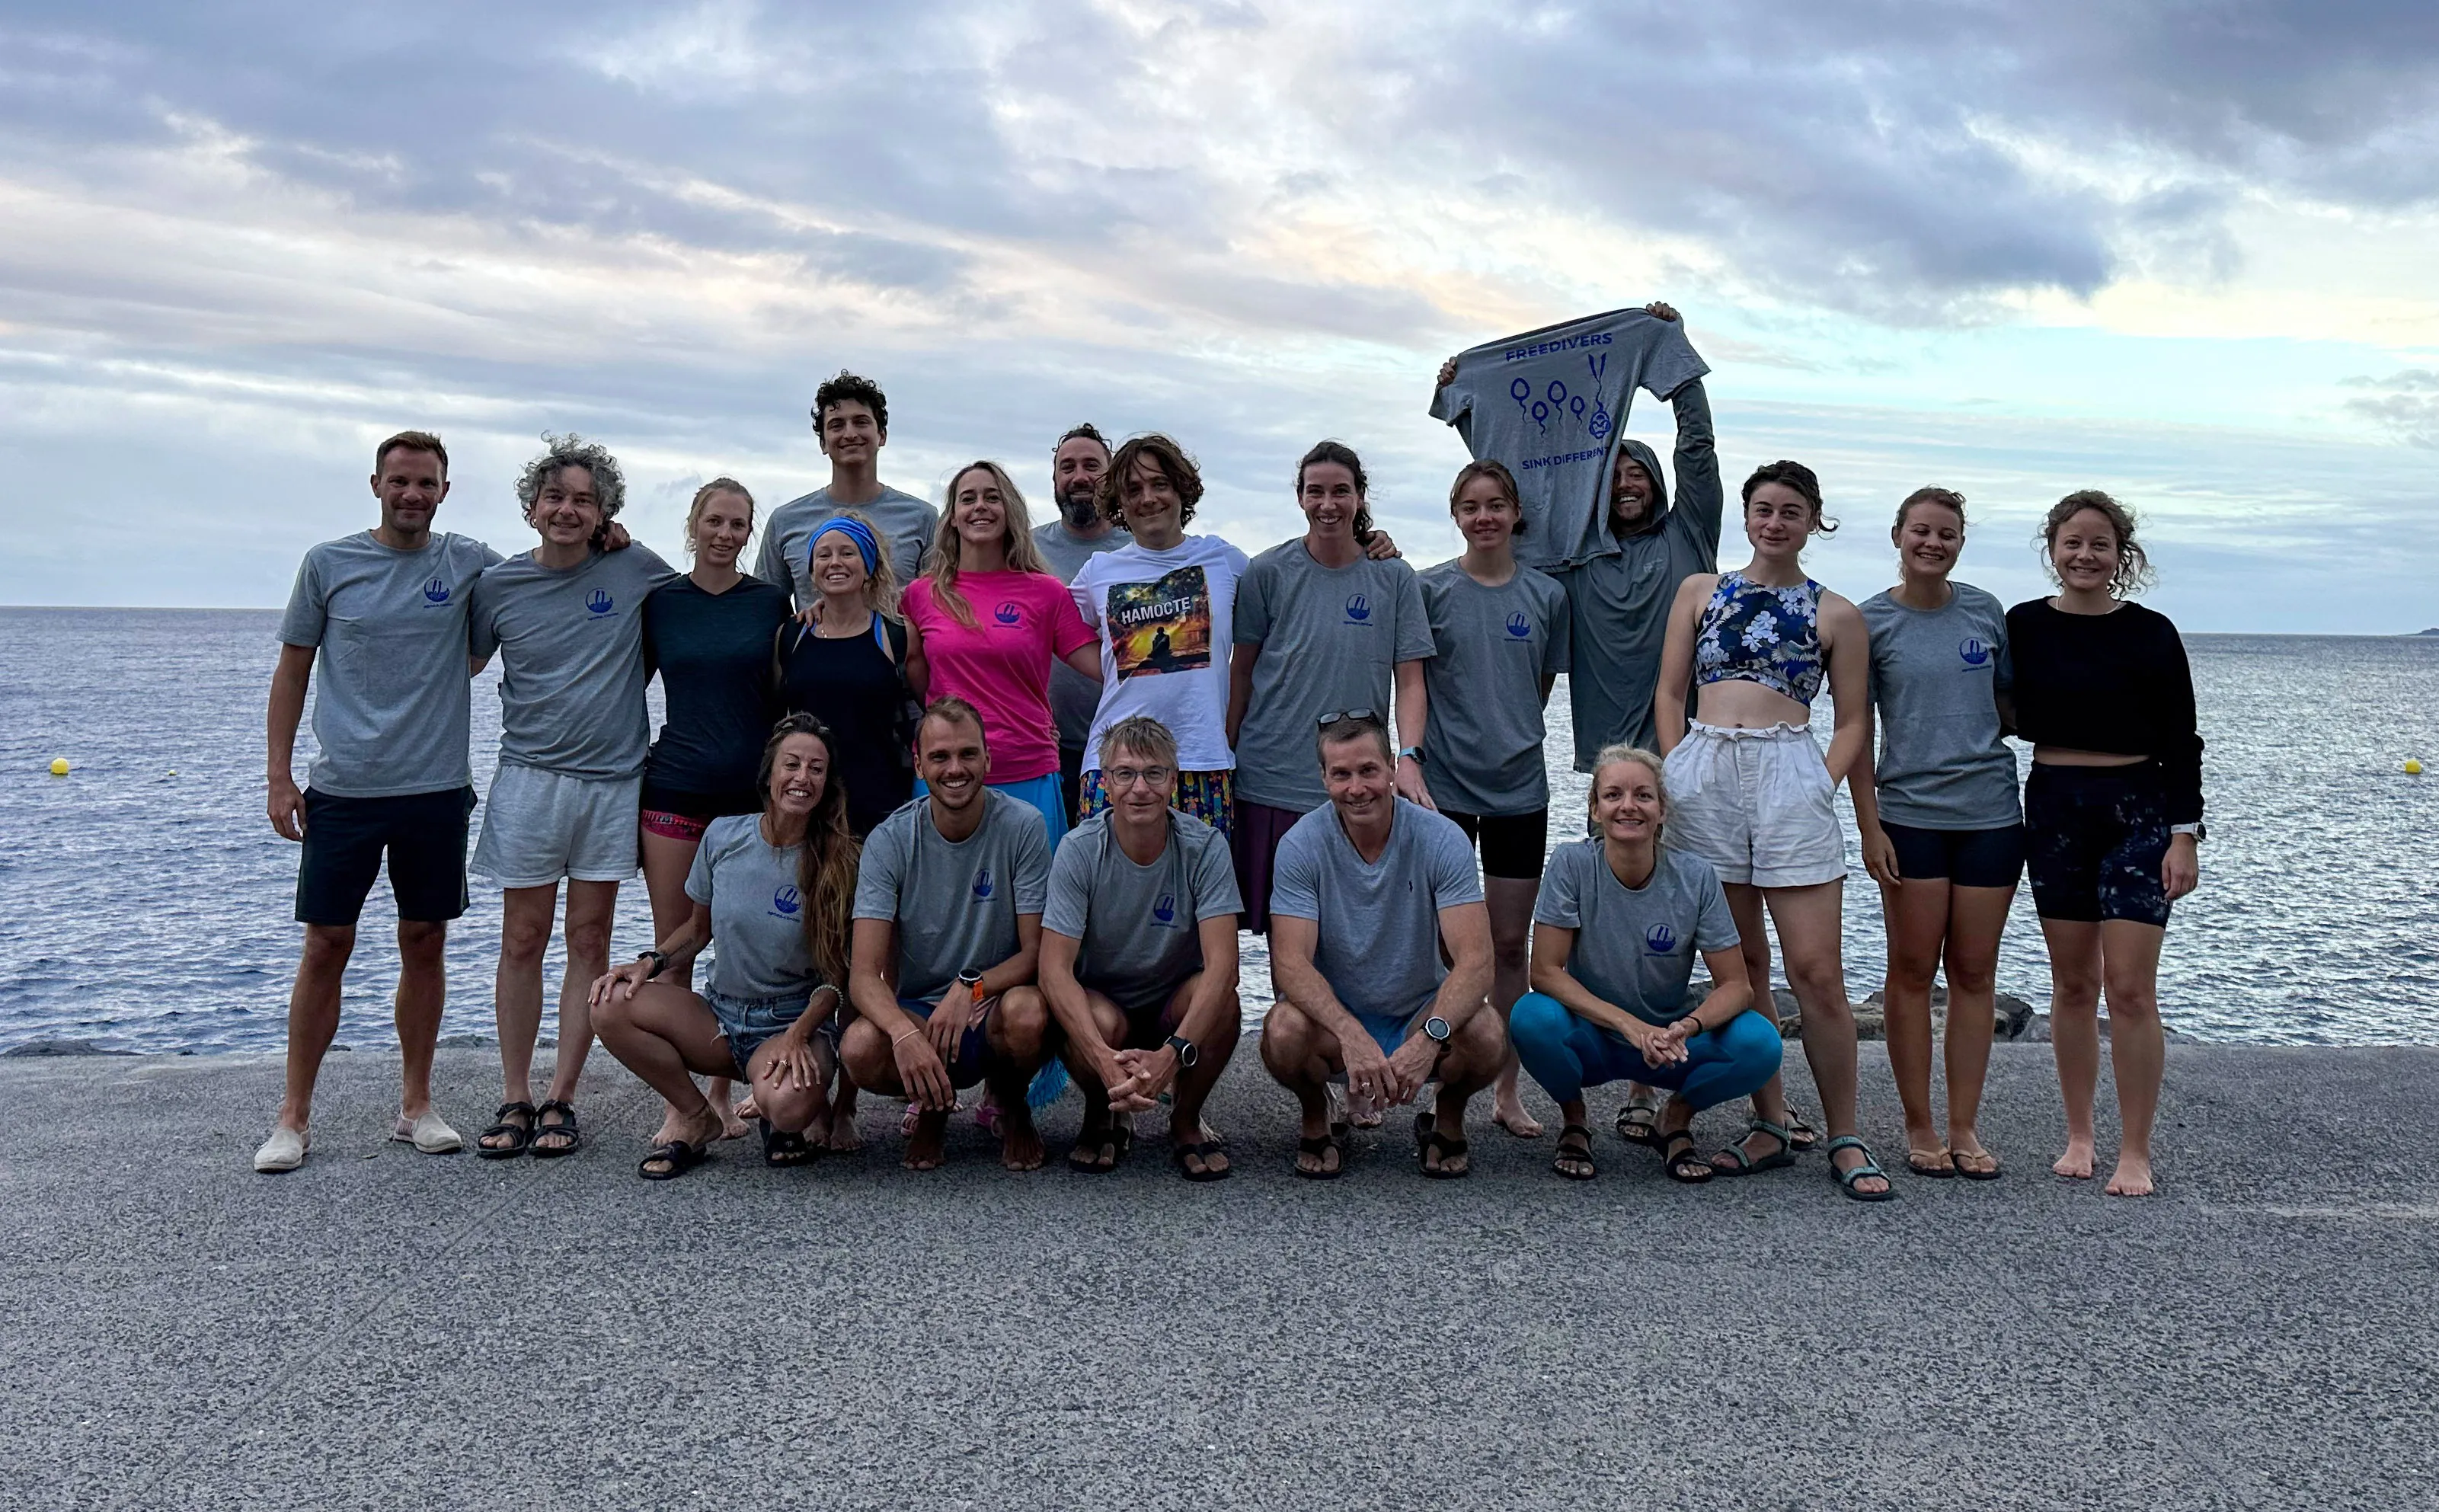 A group photo of freedivers in Tenerife